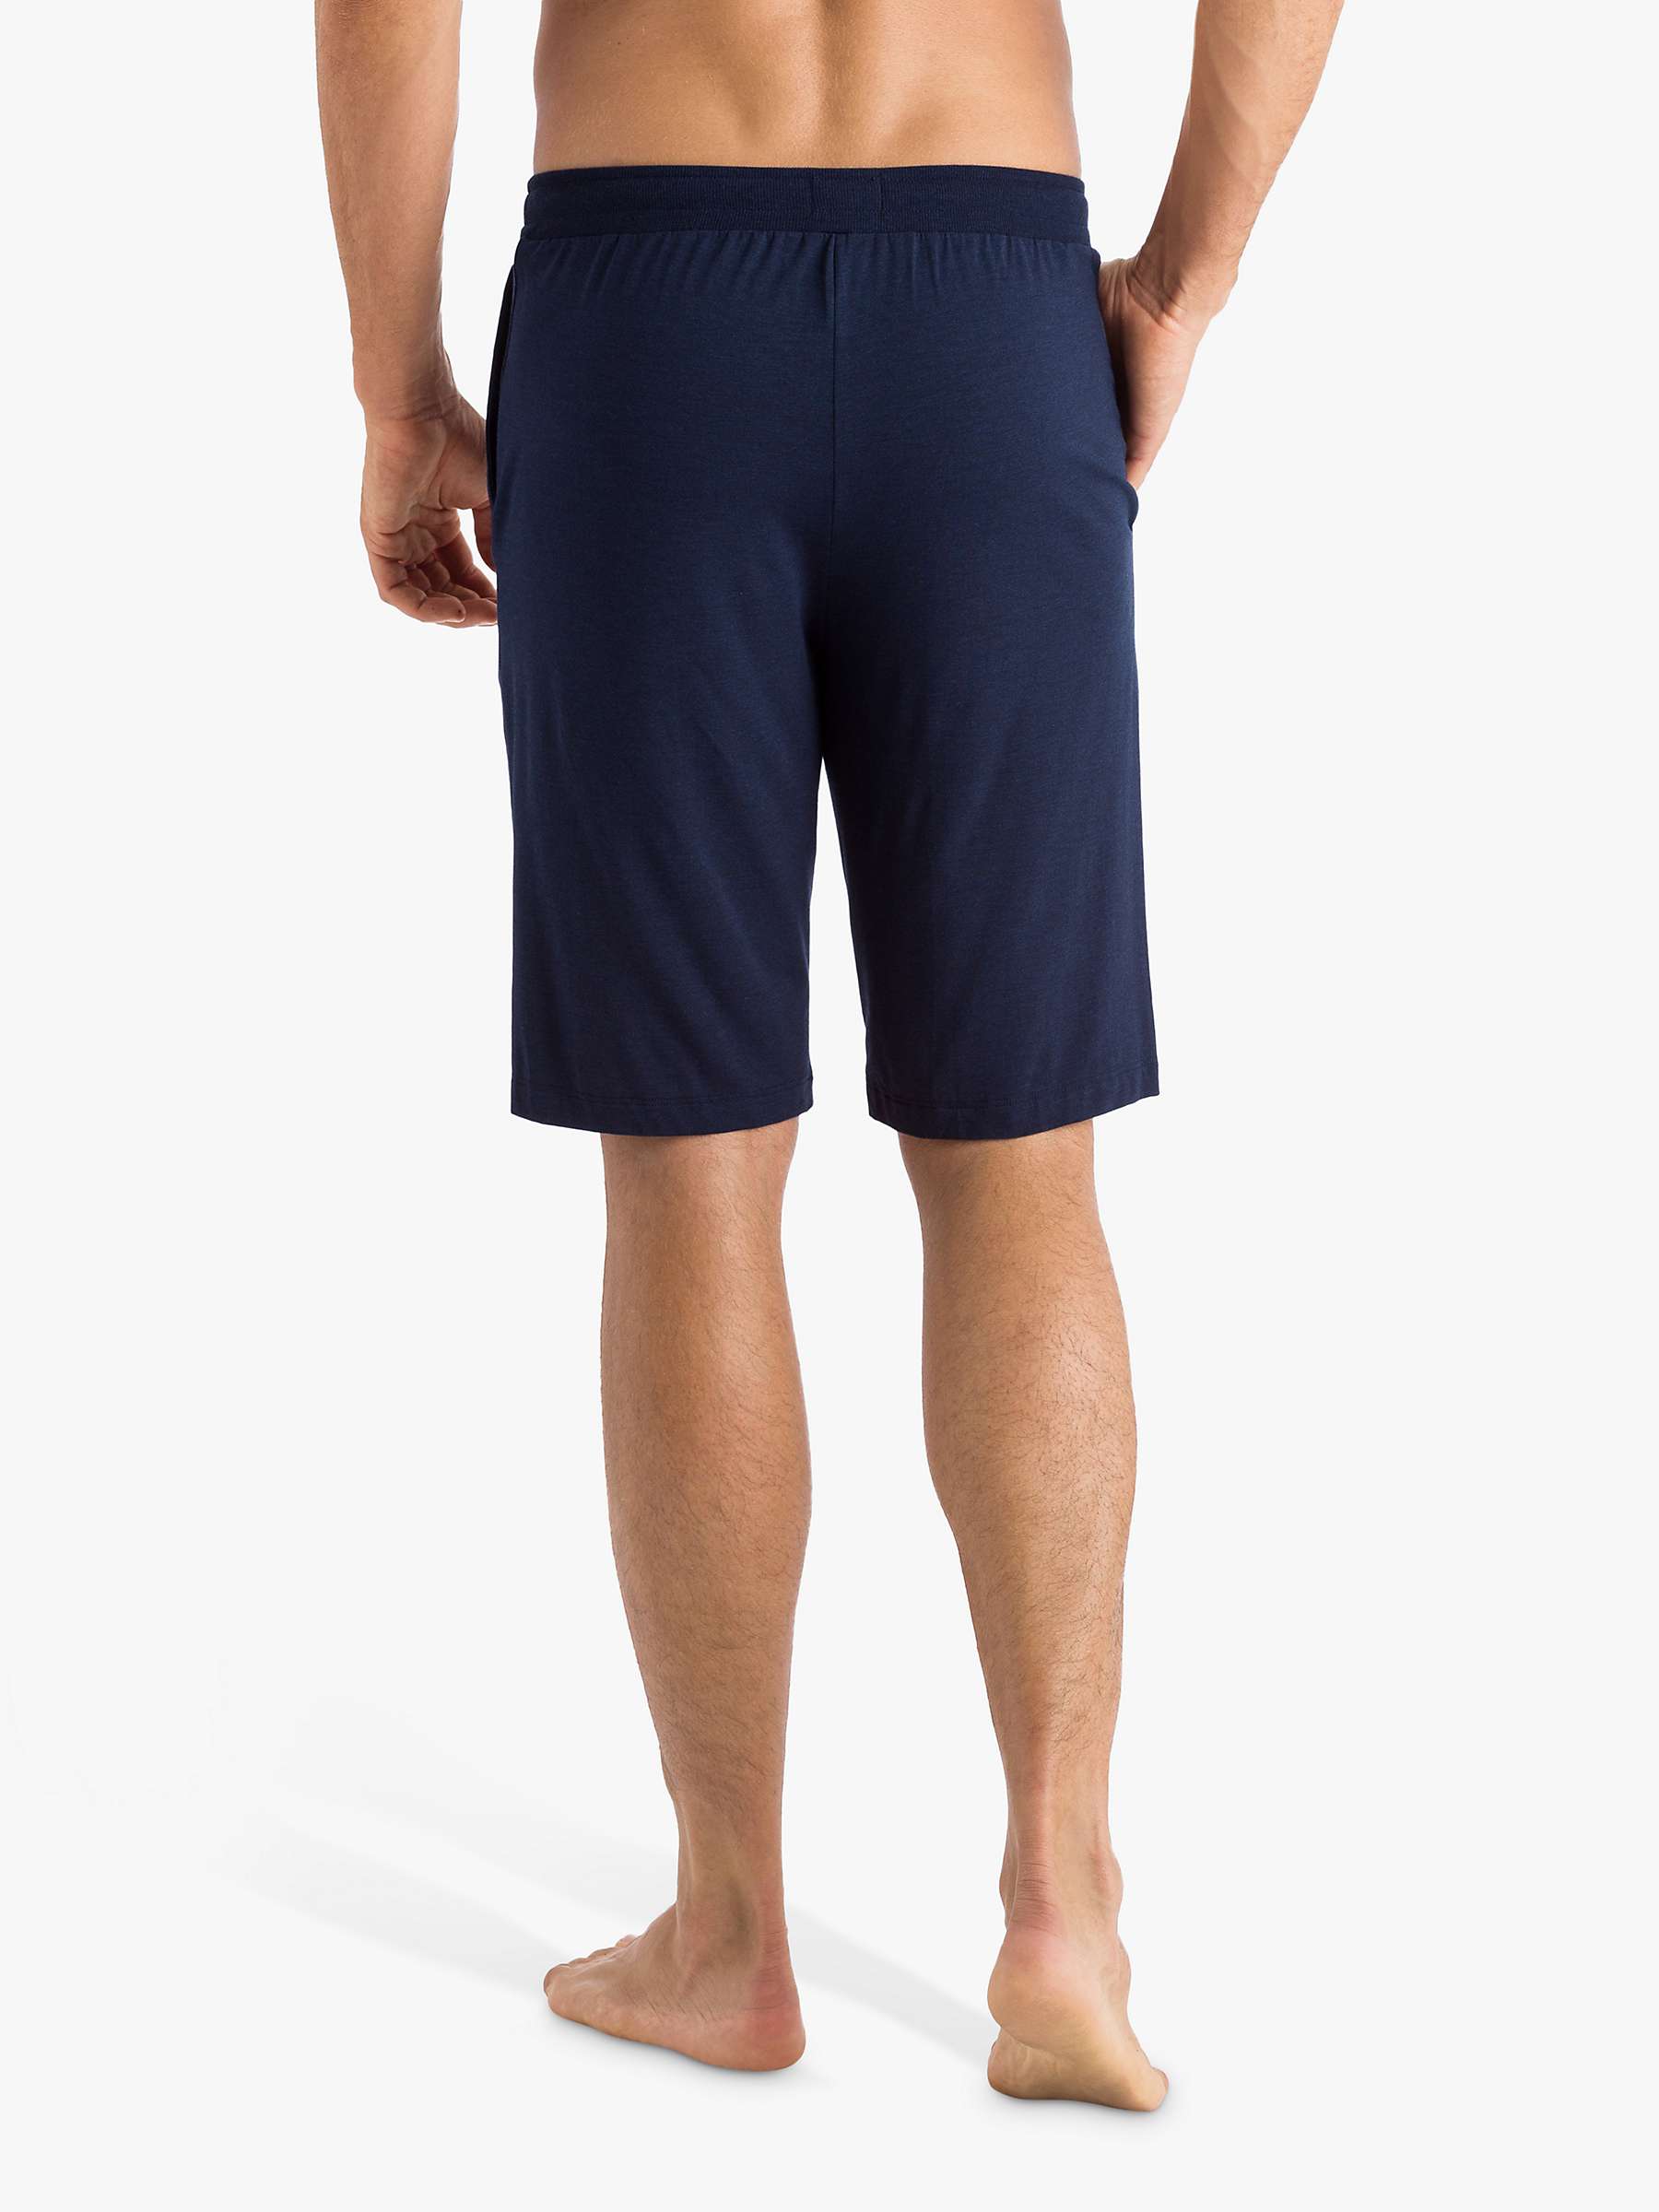 Buy Hanro Casual Lounge Shorts, Blue Navy Online at johnlewis.com